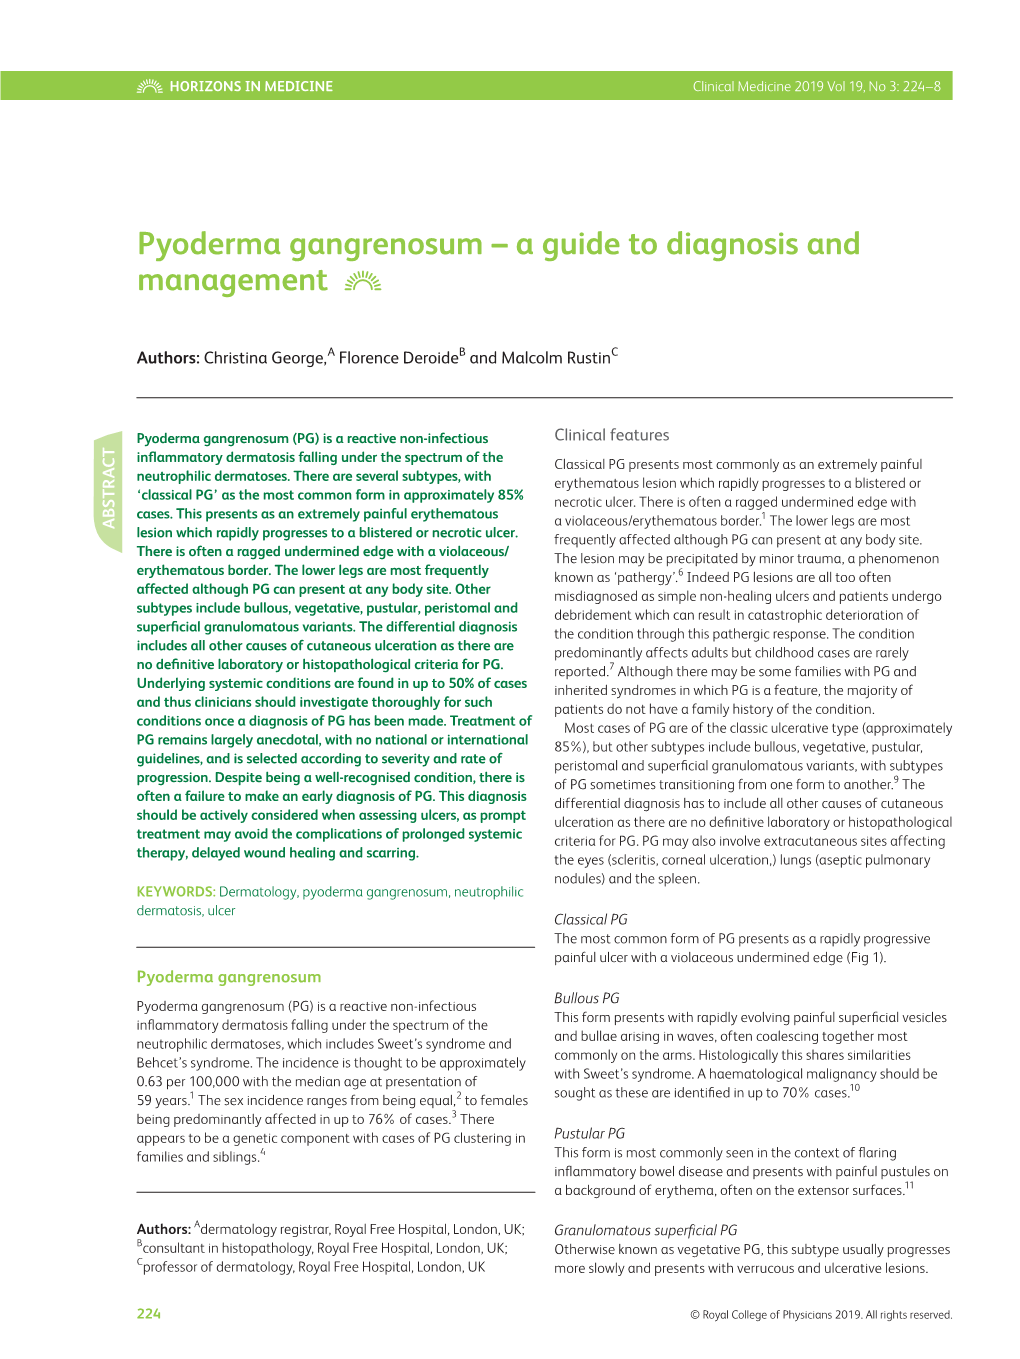 Pyoderma Gangrenosum – a Guide to Diagnosis and Management